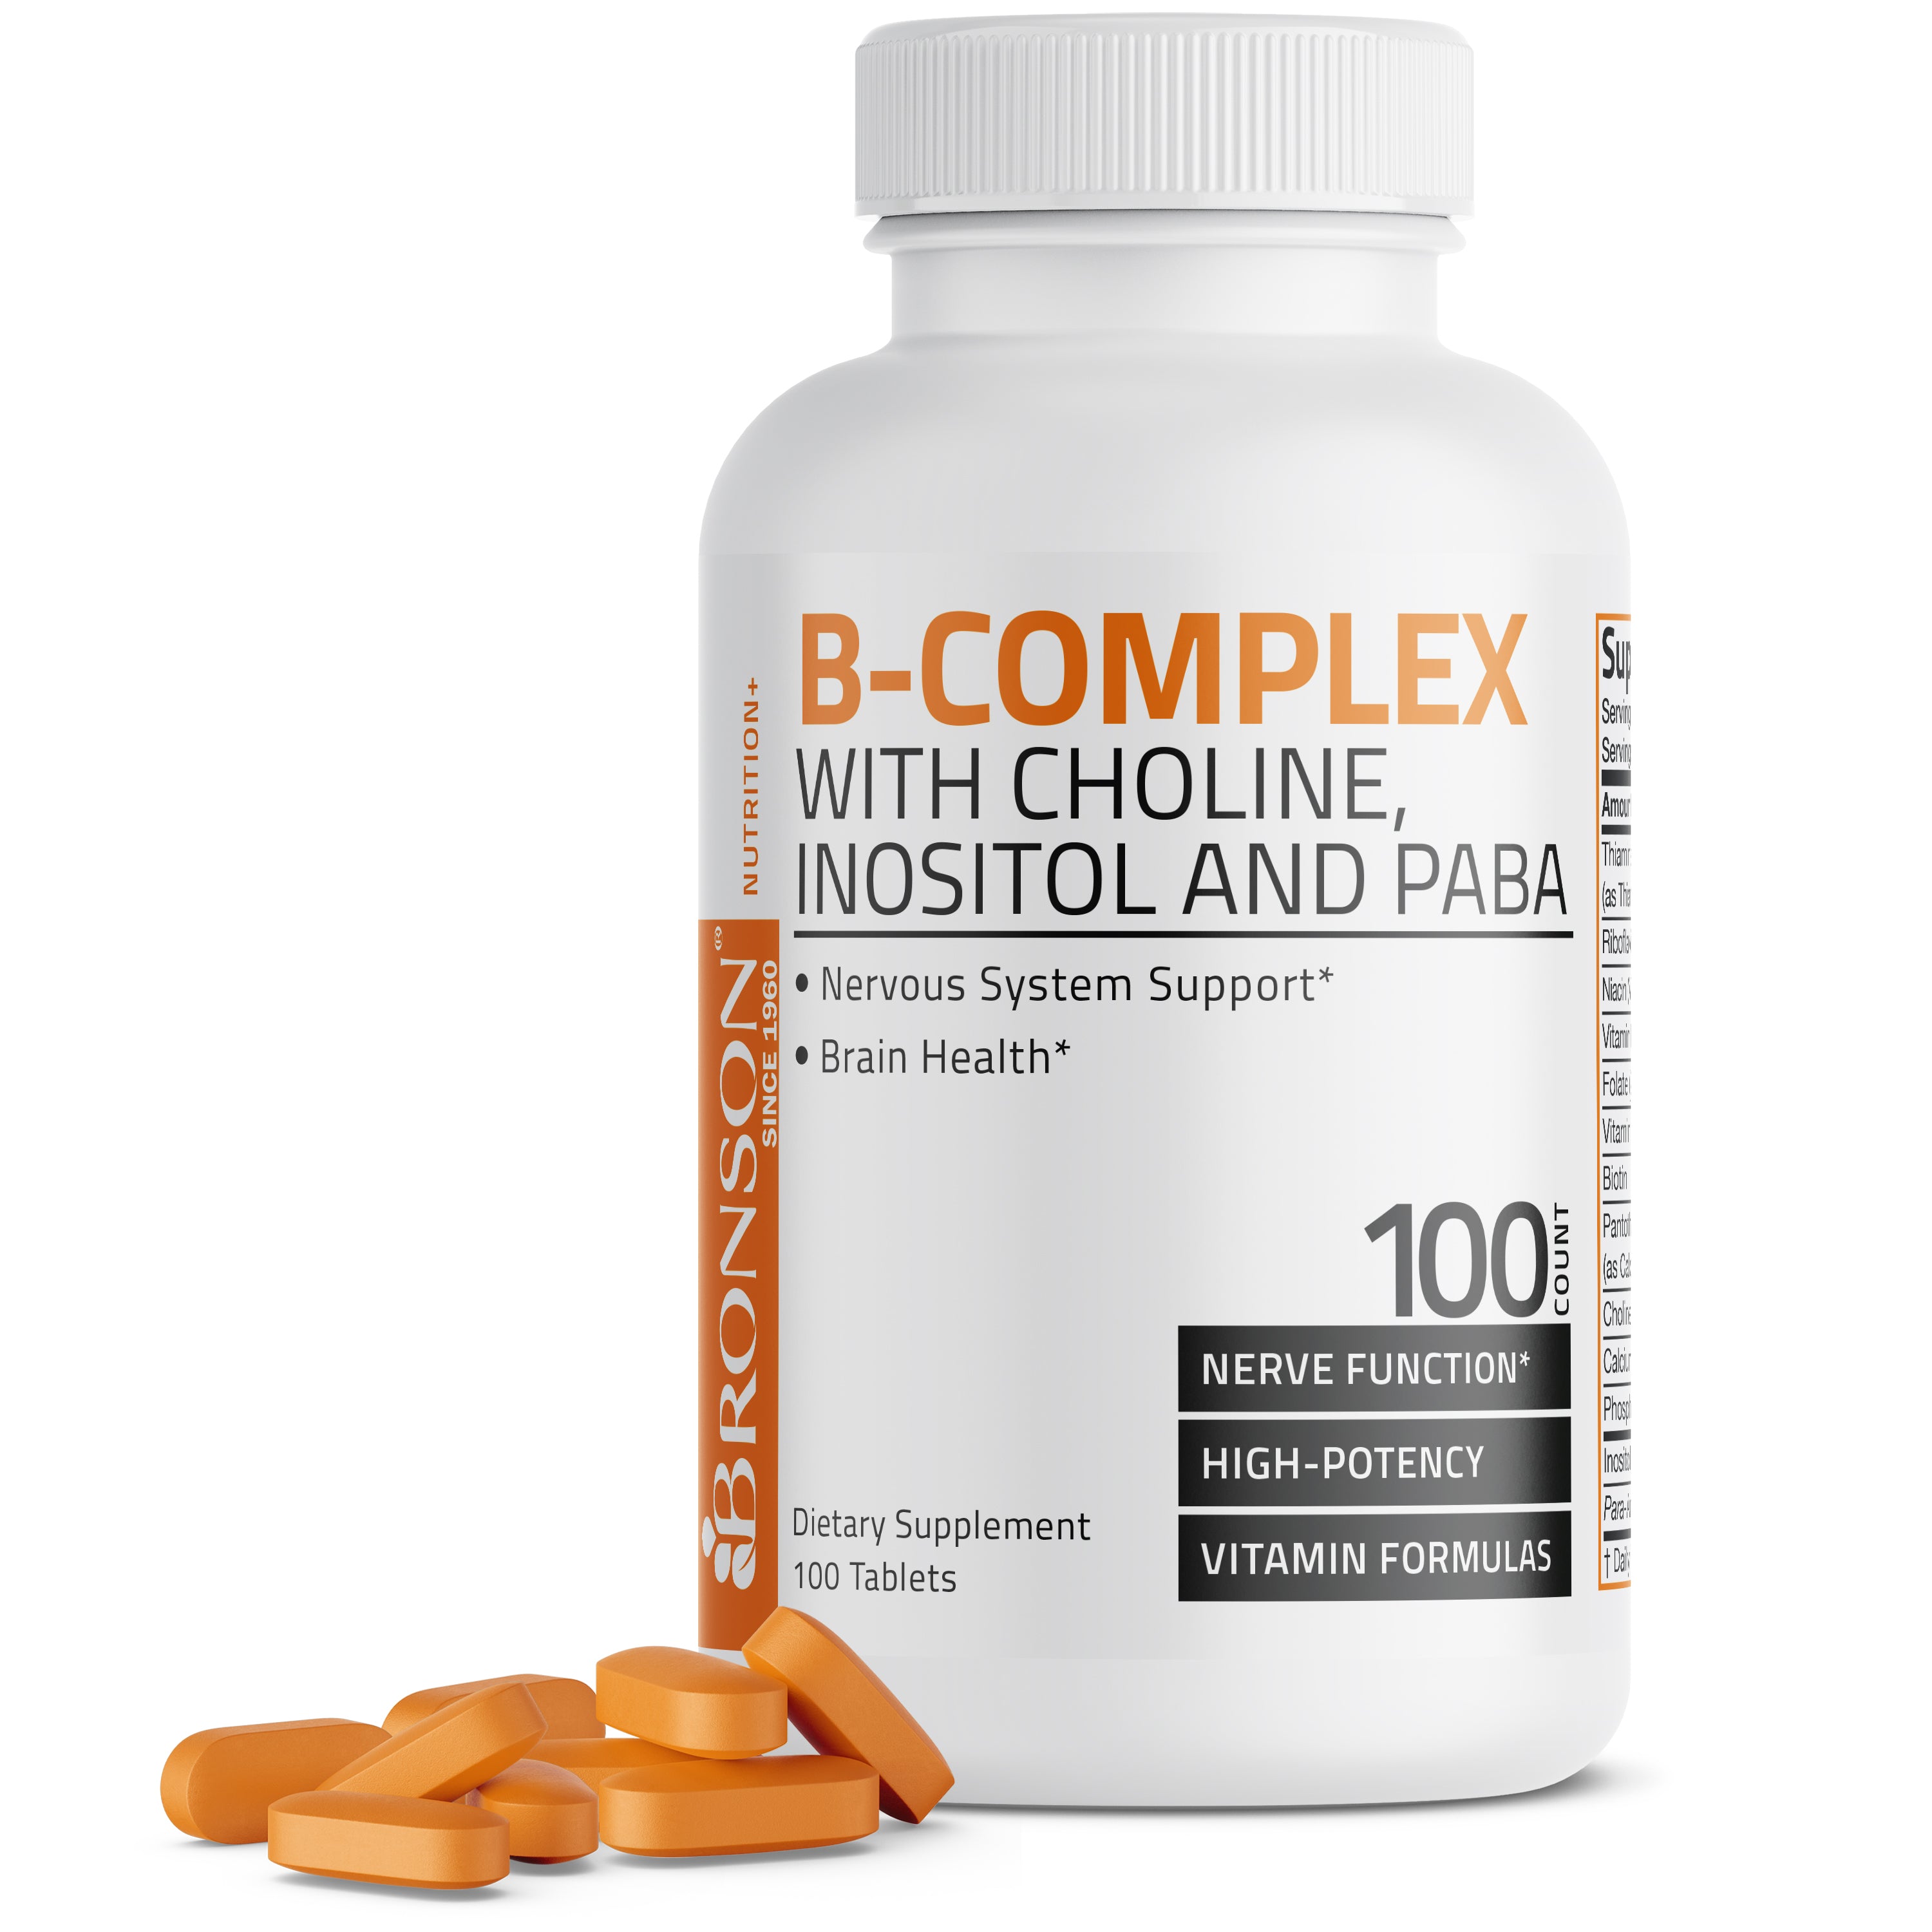 Vitamin B Complex with Choline, Inositol and Paba view 1 of 6